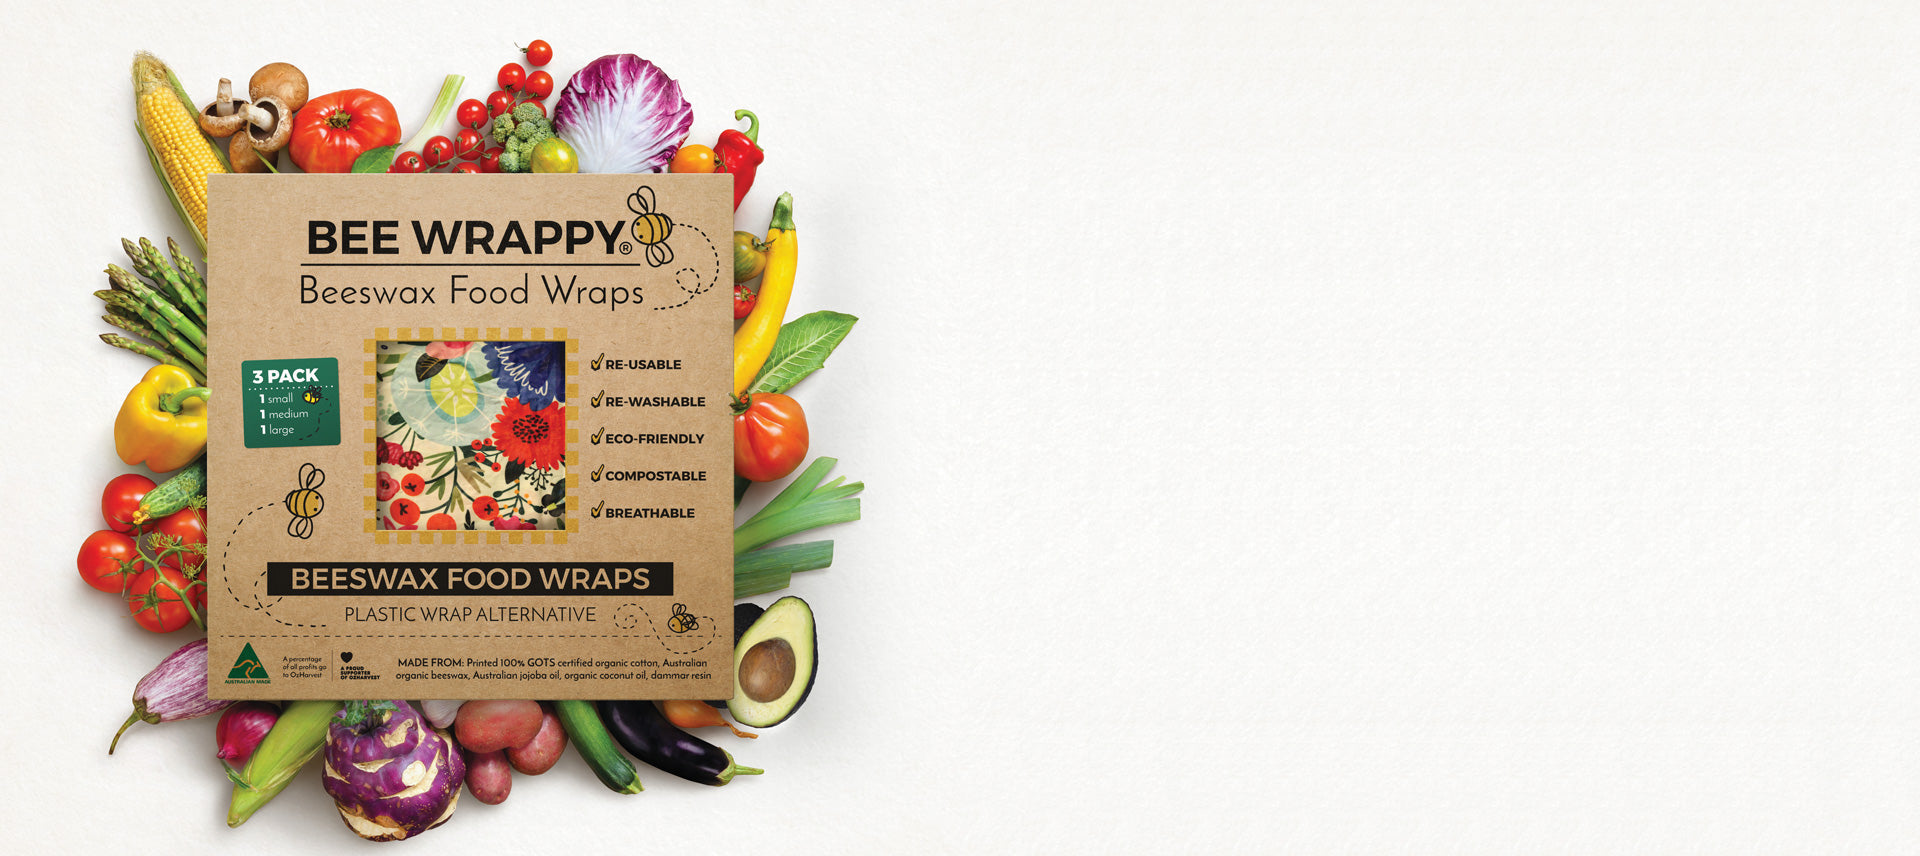 Beeswax Wraps by Bee Wrappy